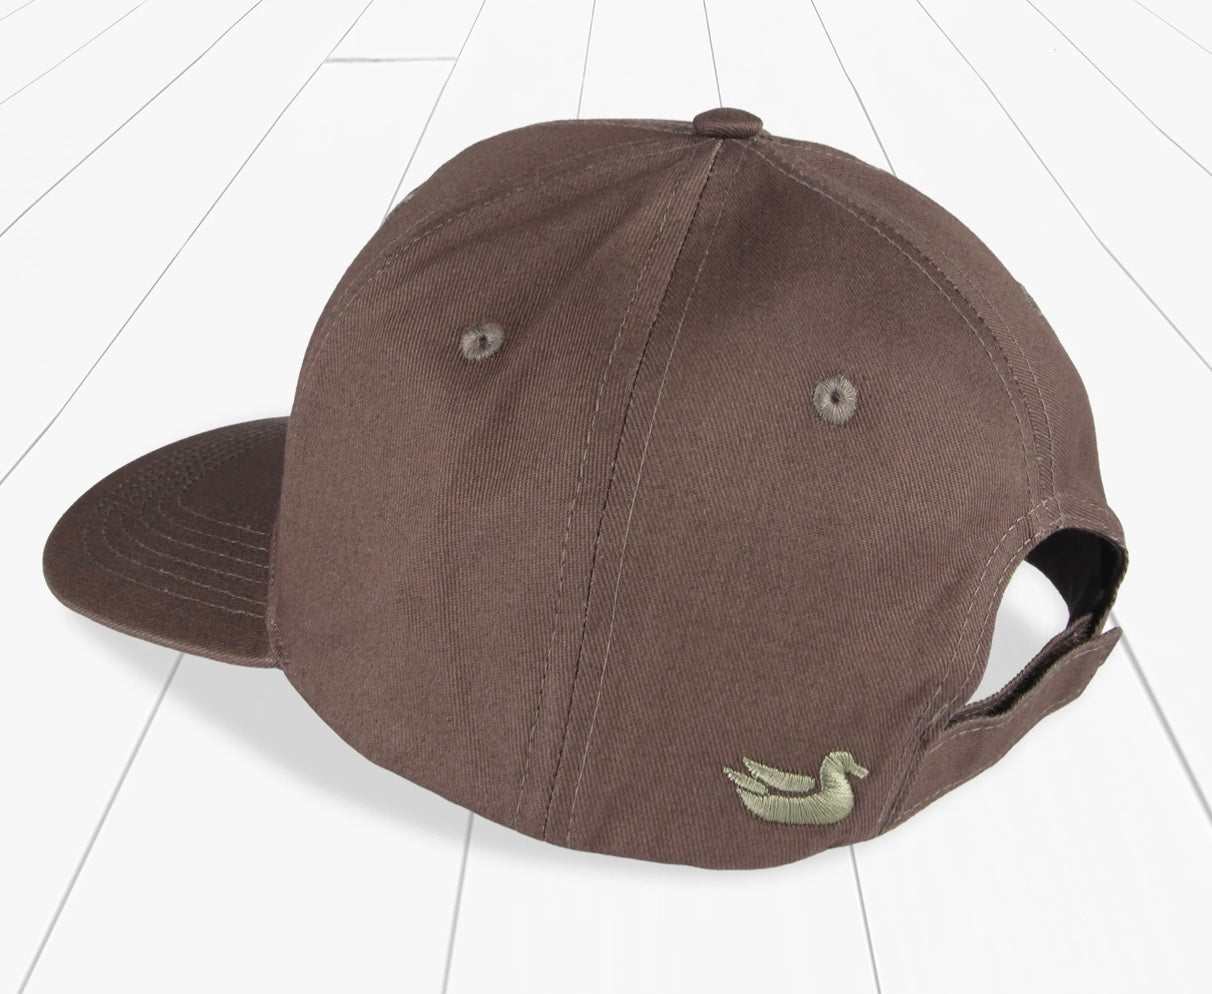 Southern Marsh Migration Hat - Brown - Jimberly's Boutique